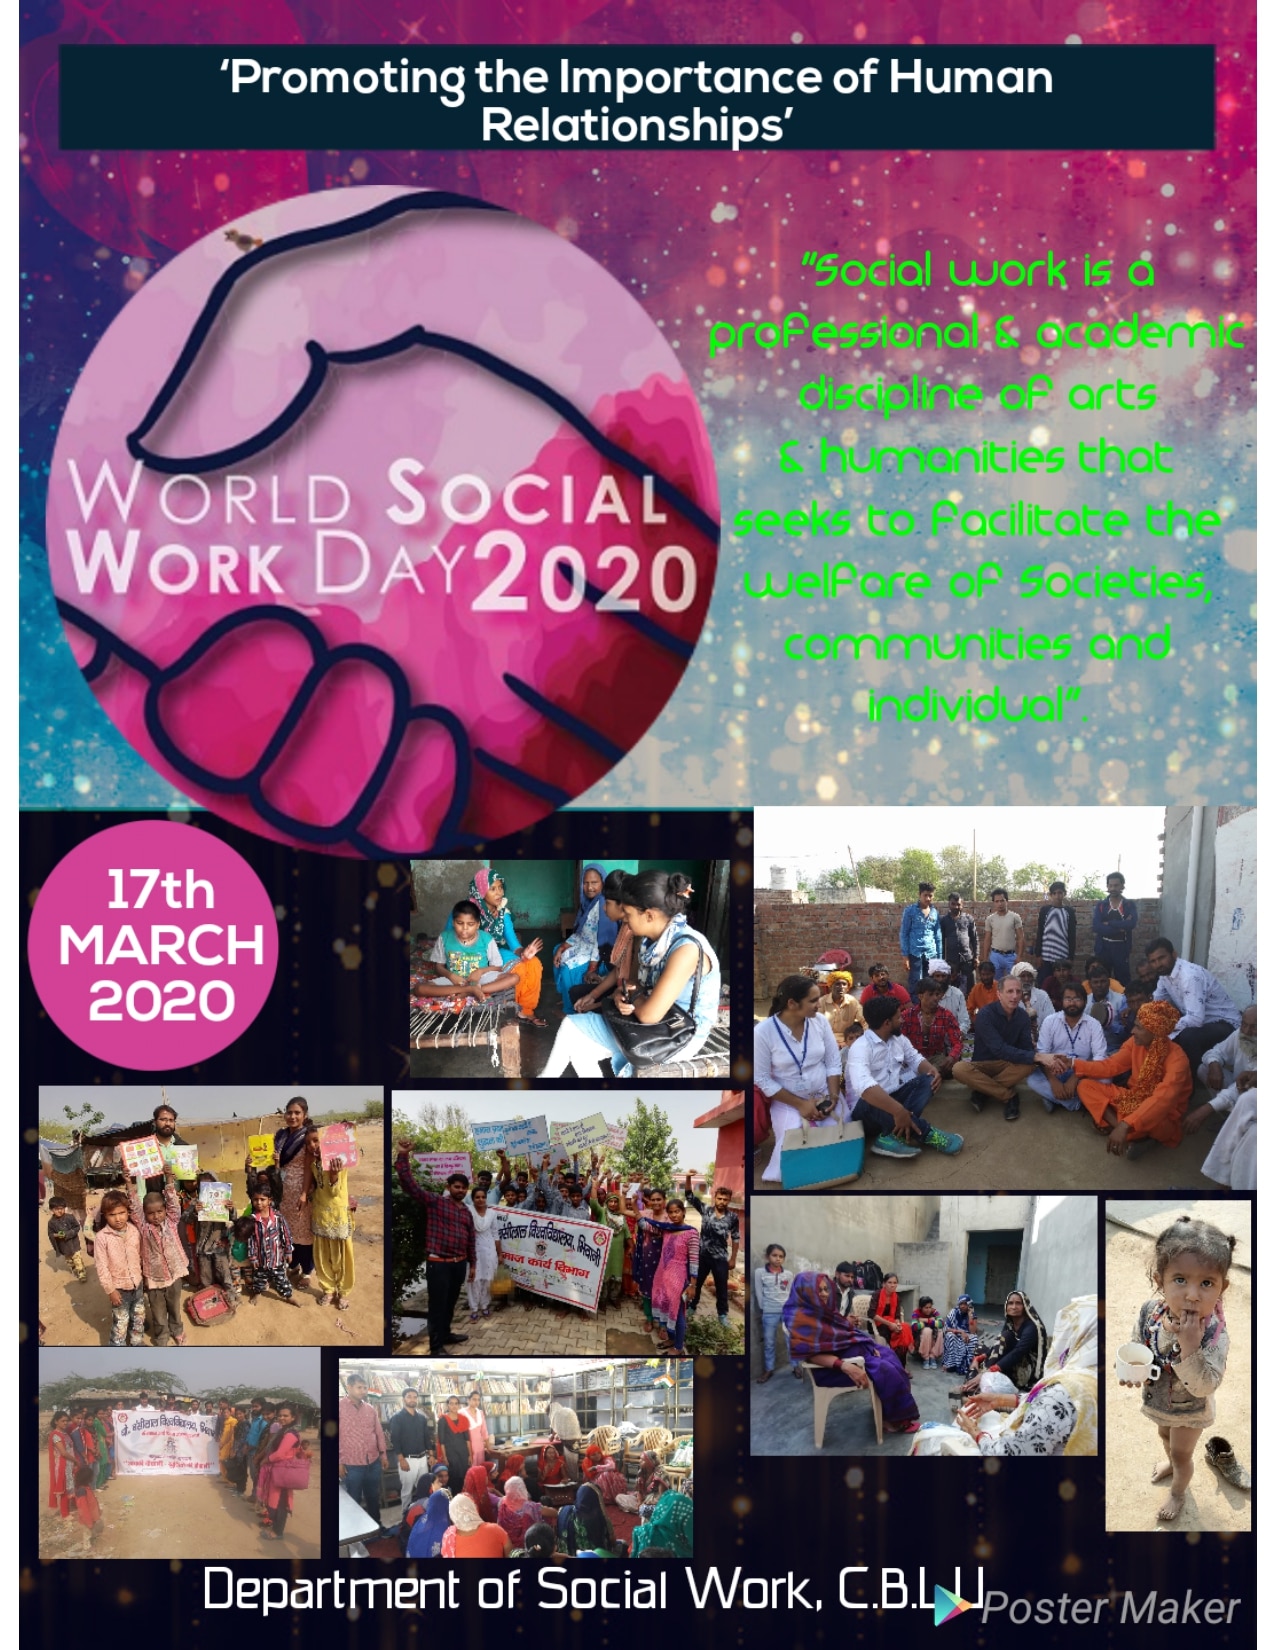 World Social Work Day 2020 International Federation of Social Workers